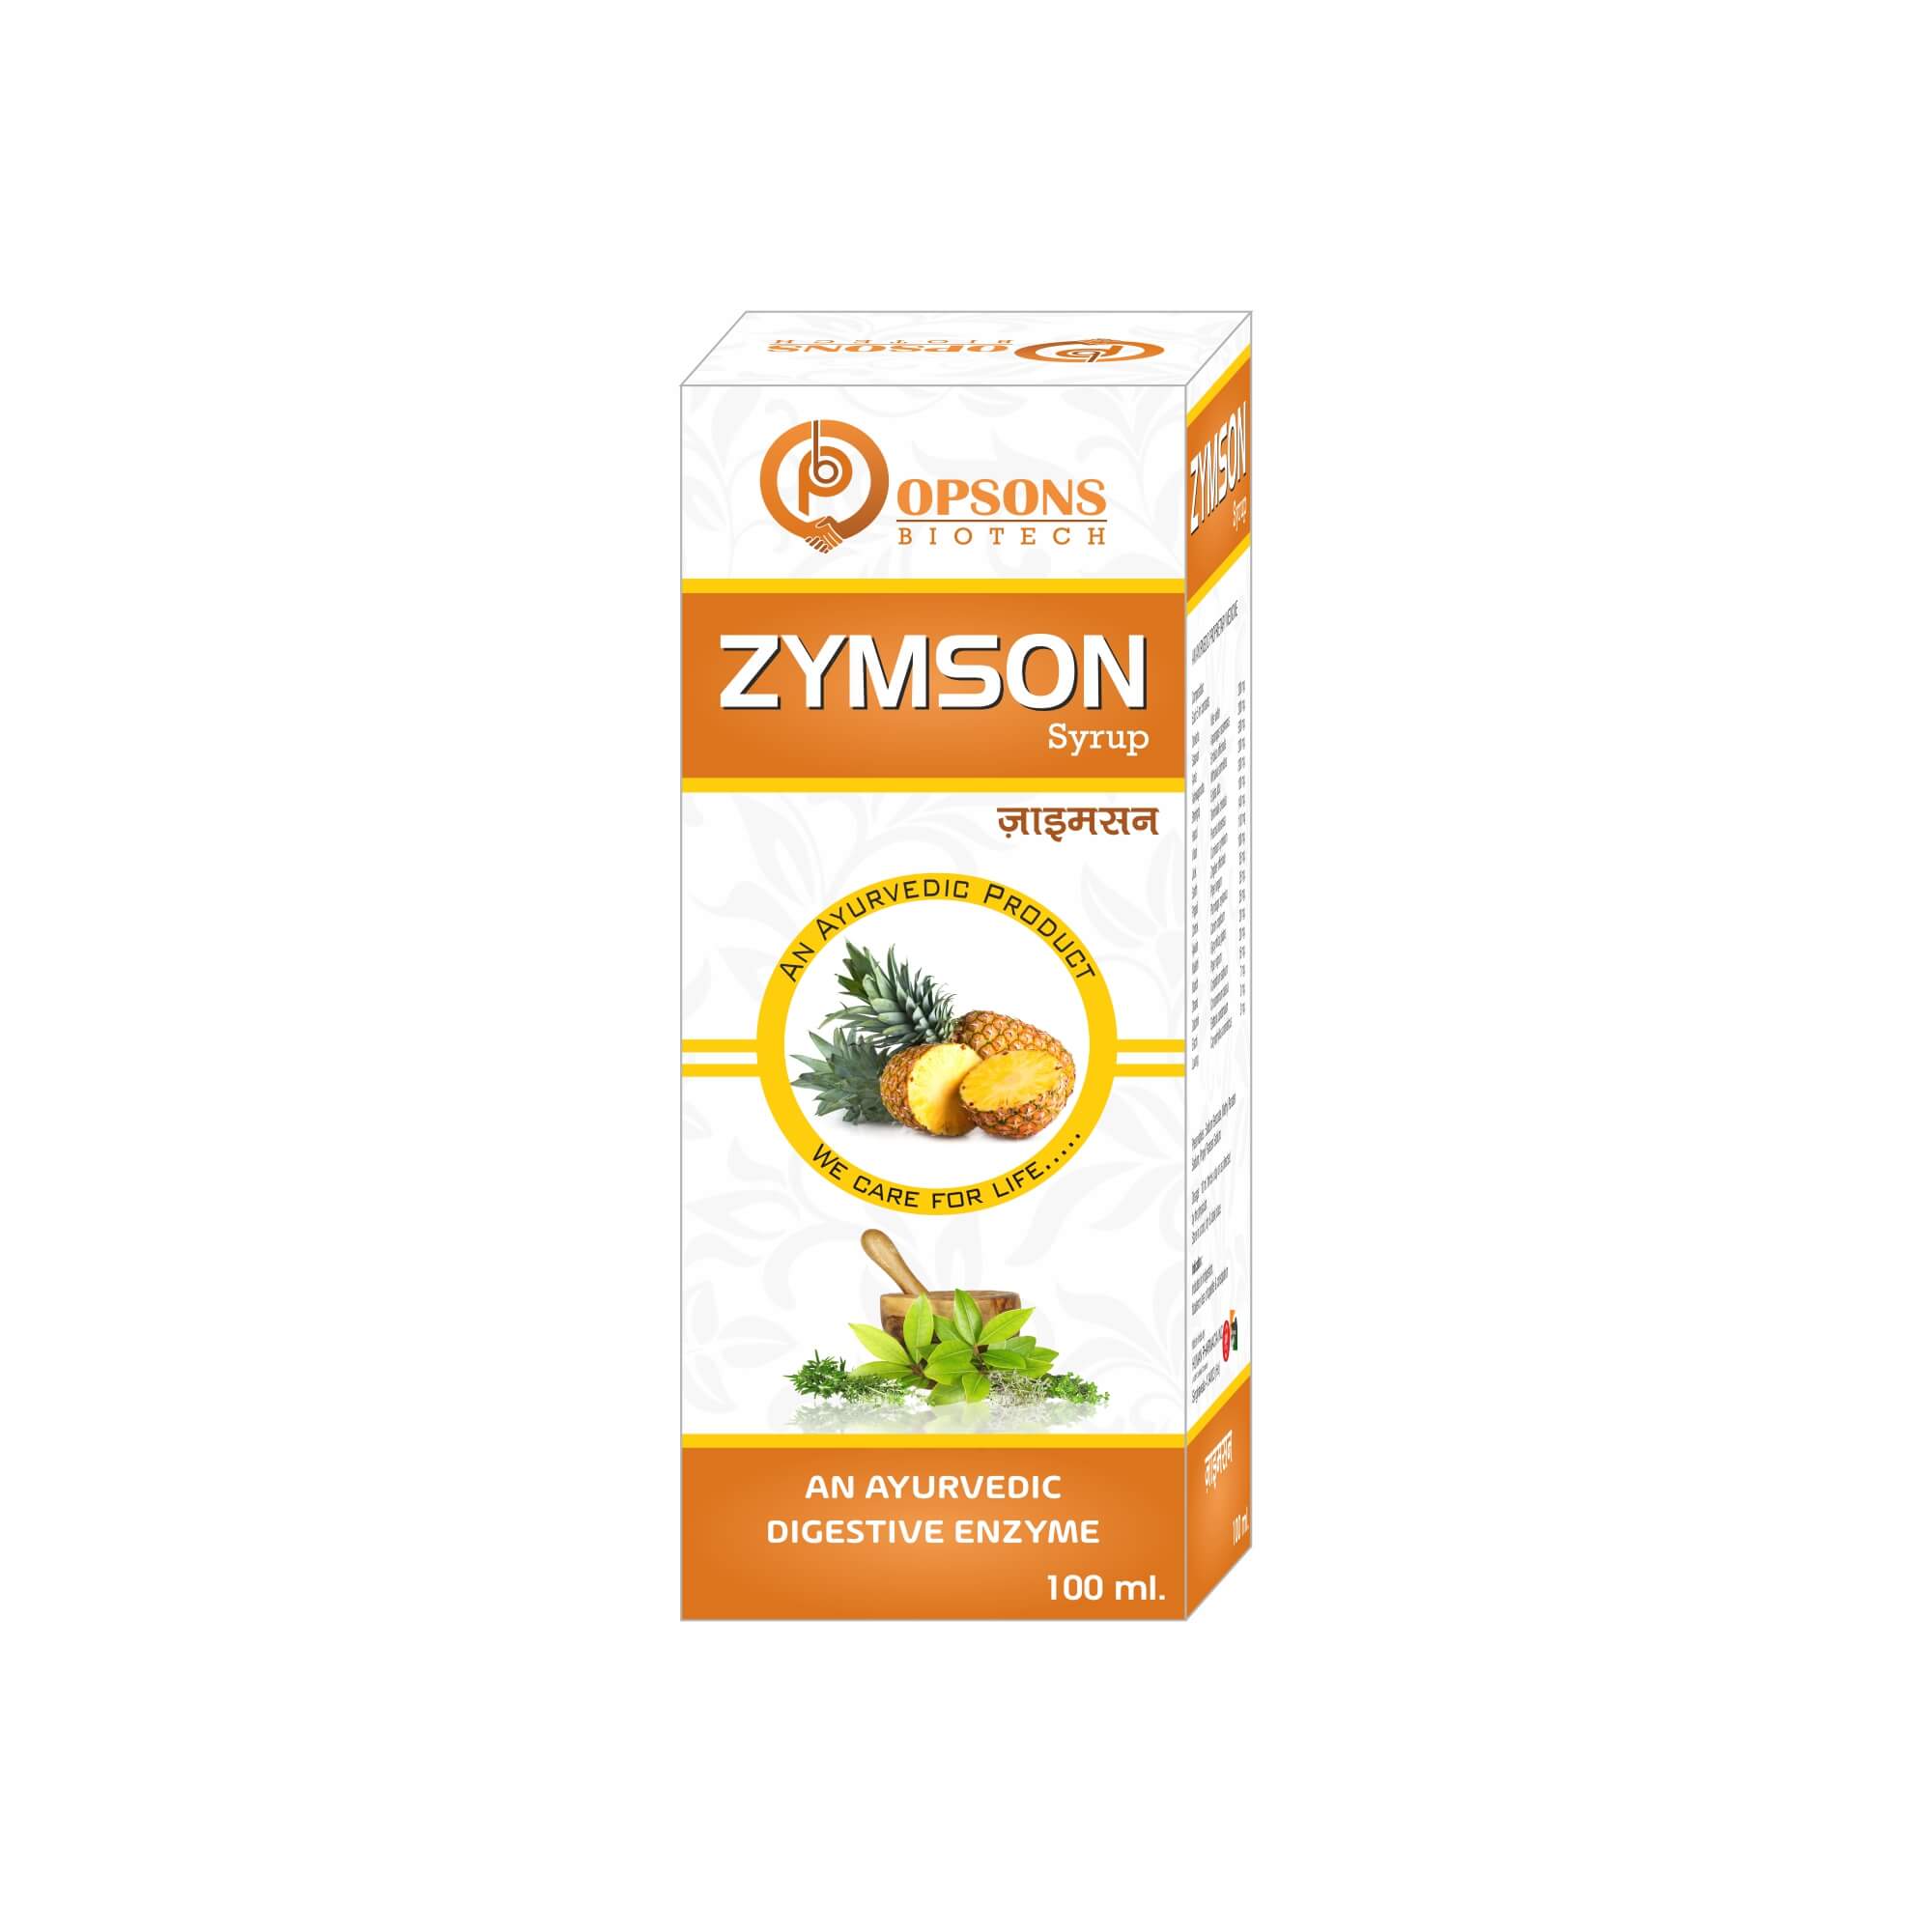 Product Name: Zymson, Compositions of Zymson are An Ayurvedic Digestive Enzyme  - Opsons Biotech